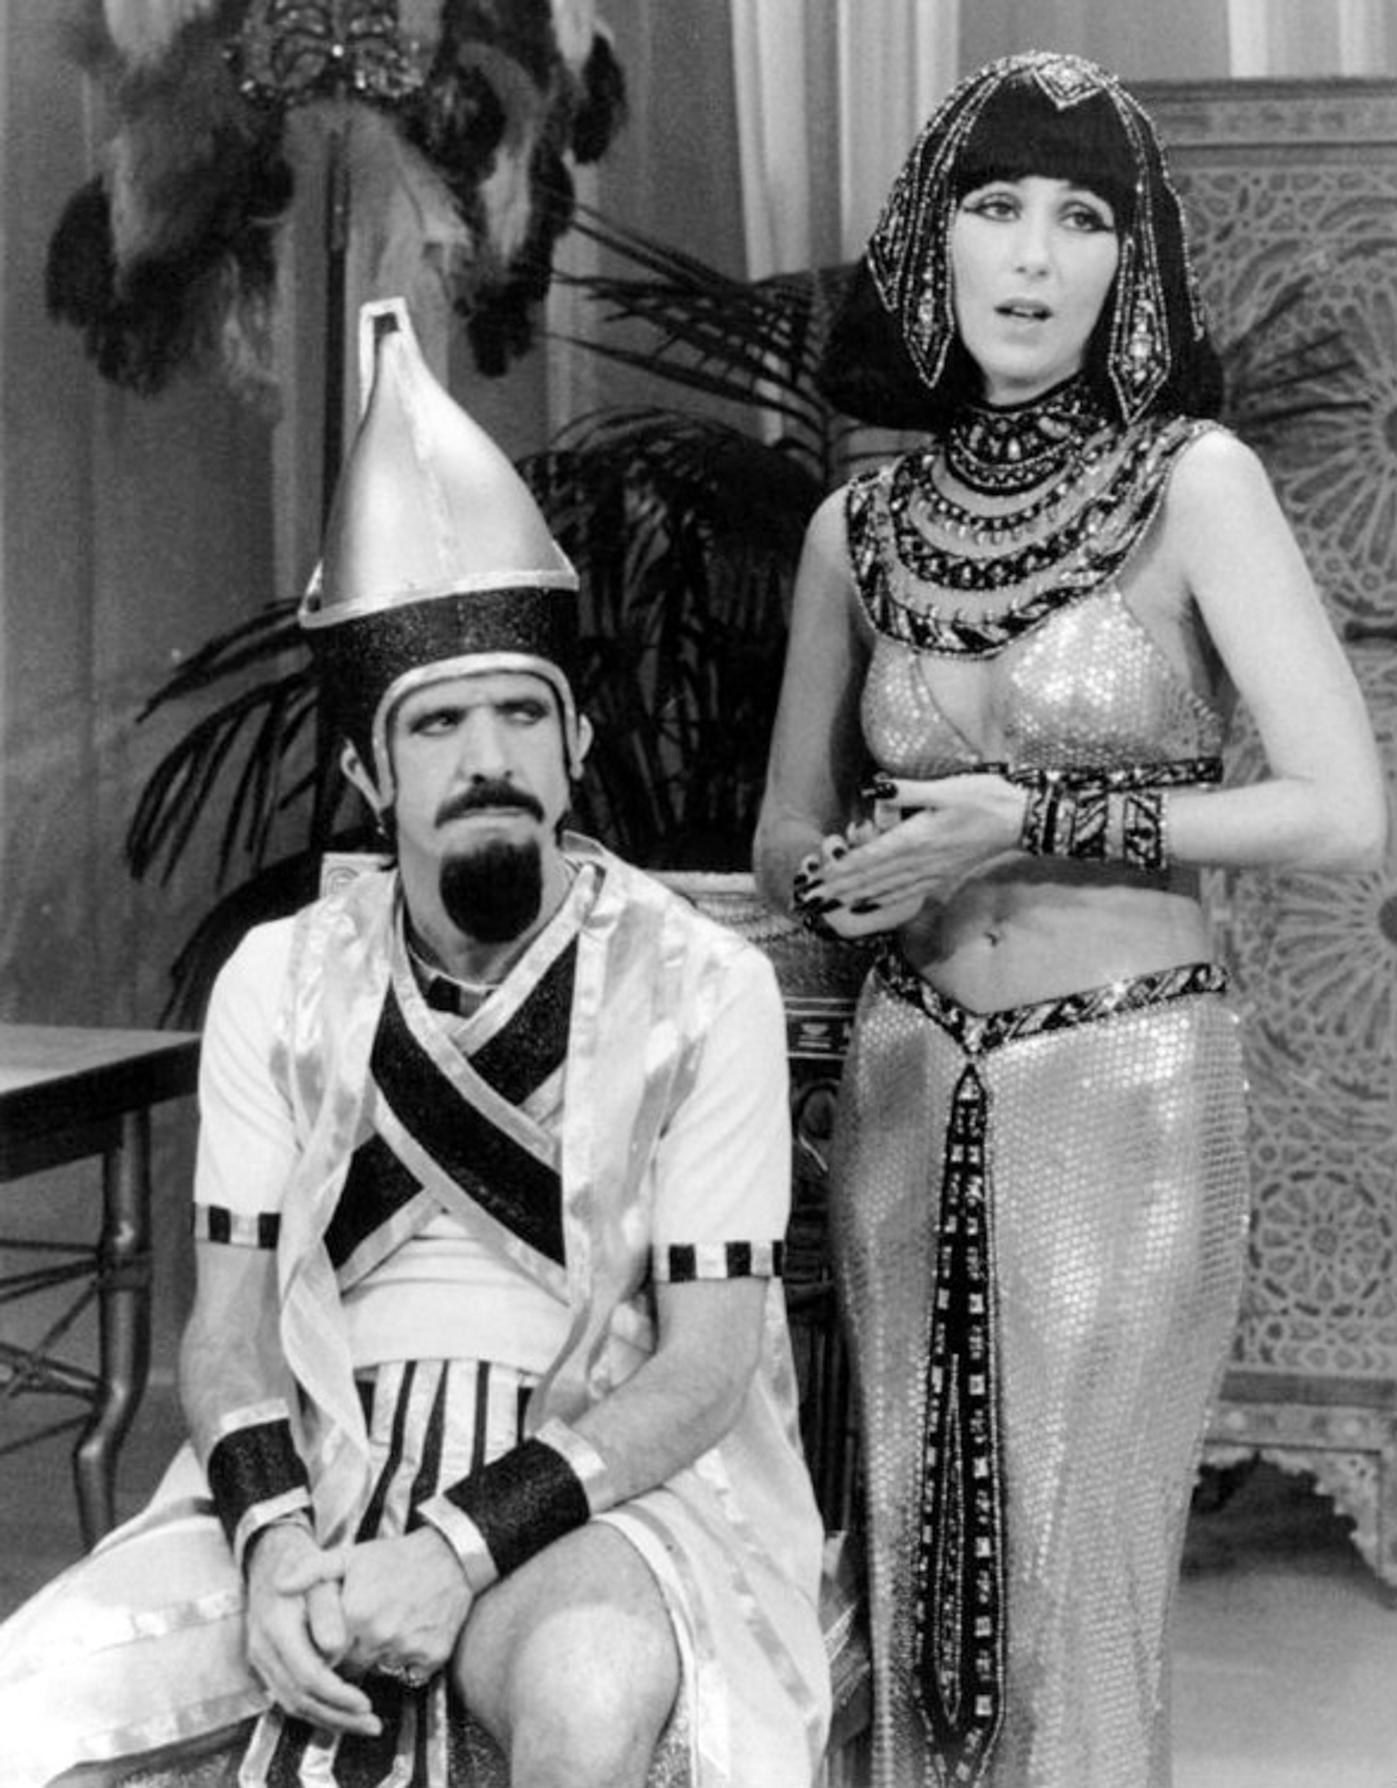 Sonny and Cher 